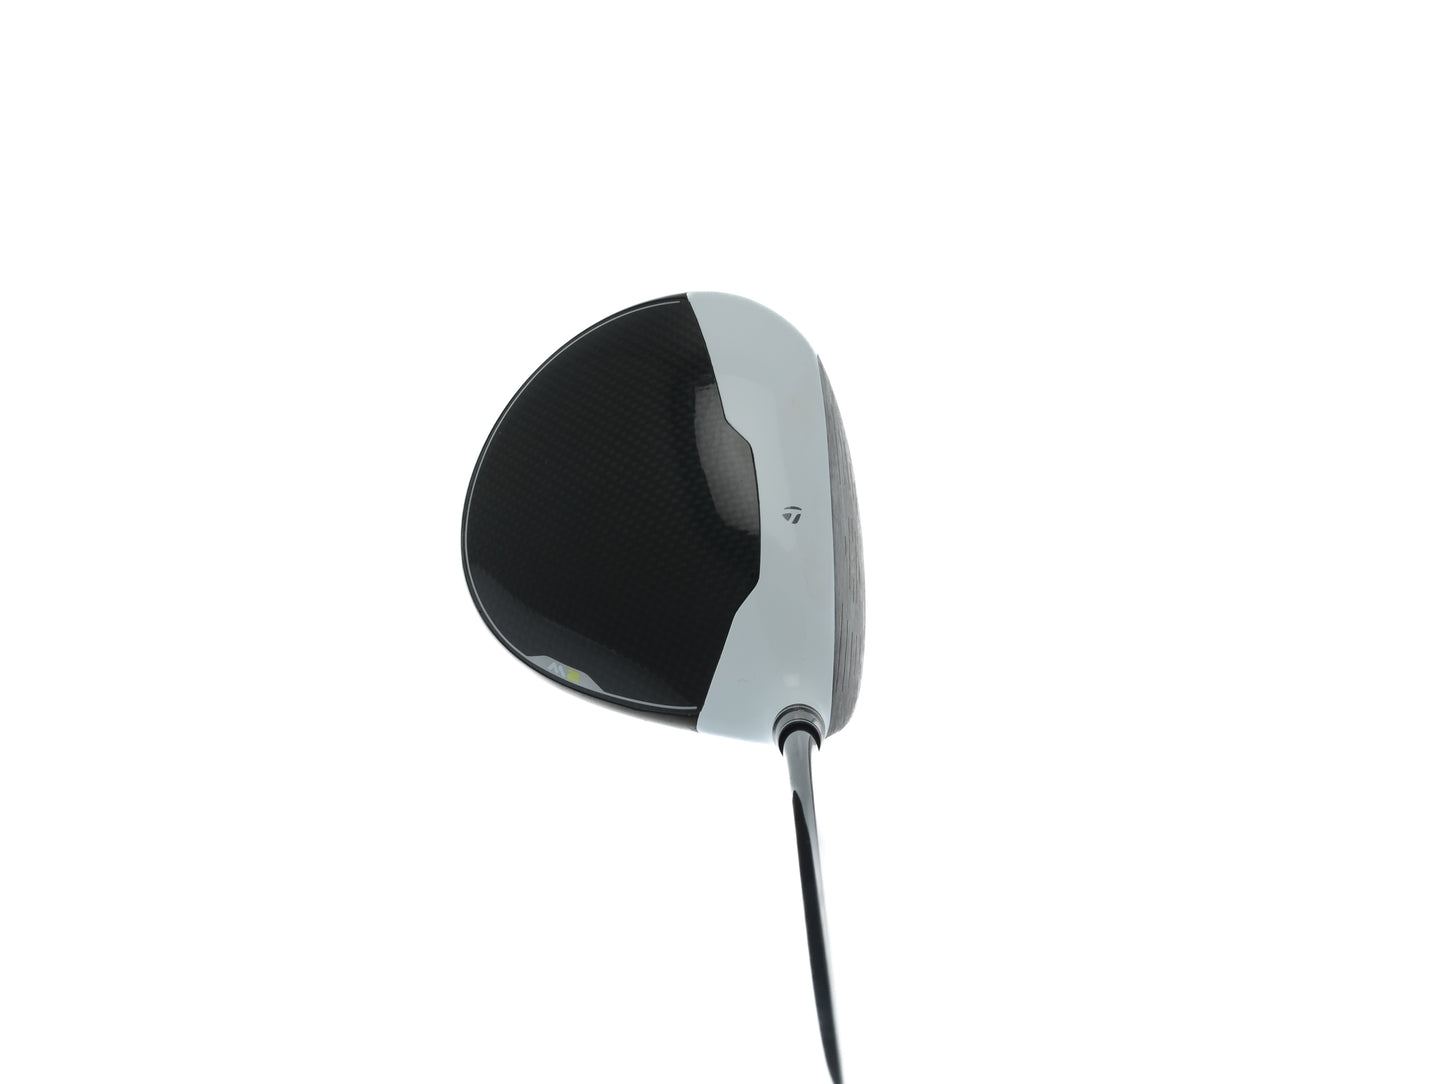 Taylormade M2 10,5